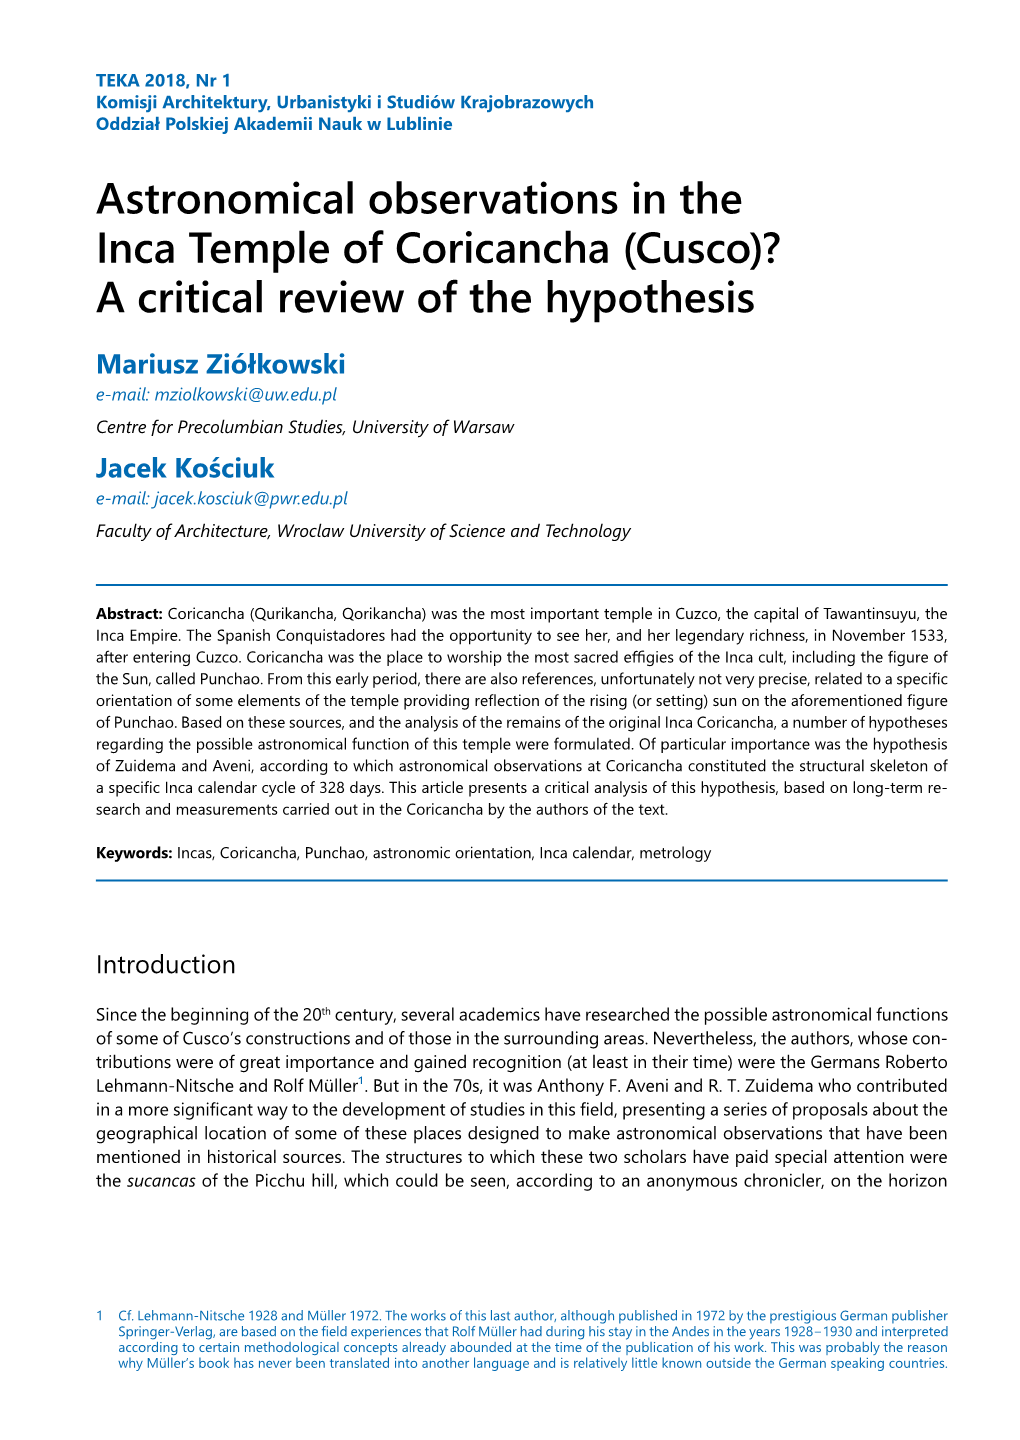 Astronomical Observations in the Inca Temple of Coricancha (Cusco)?